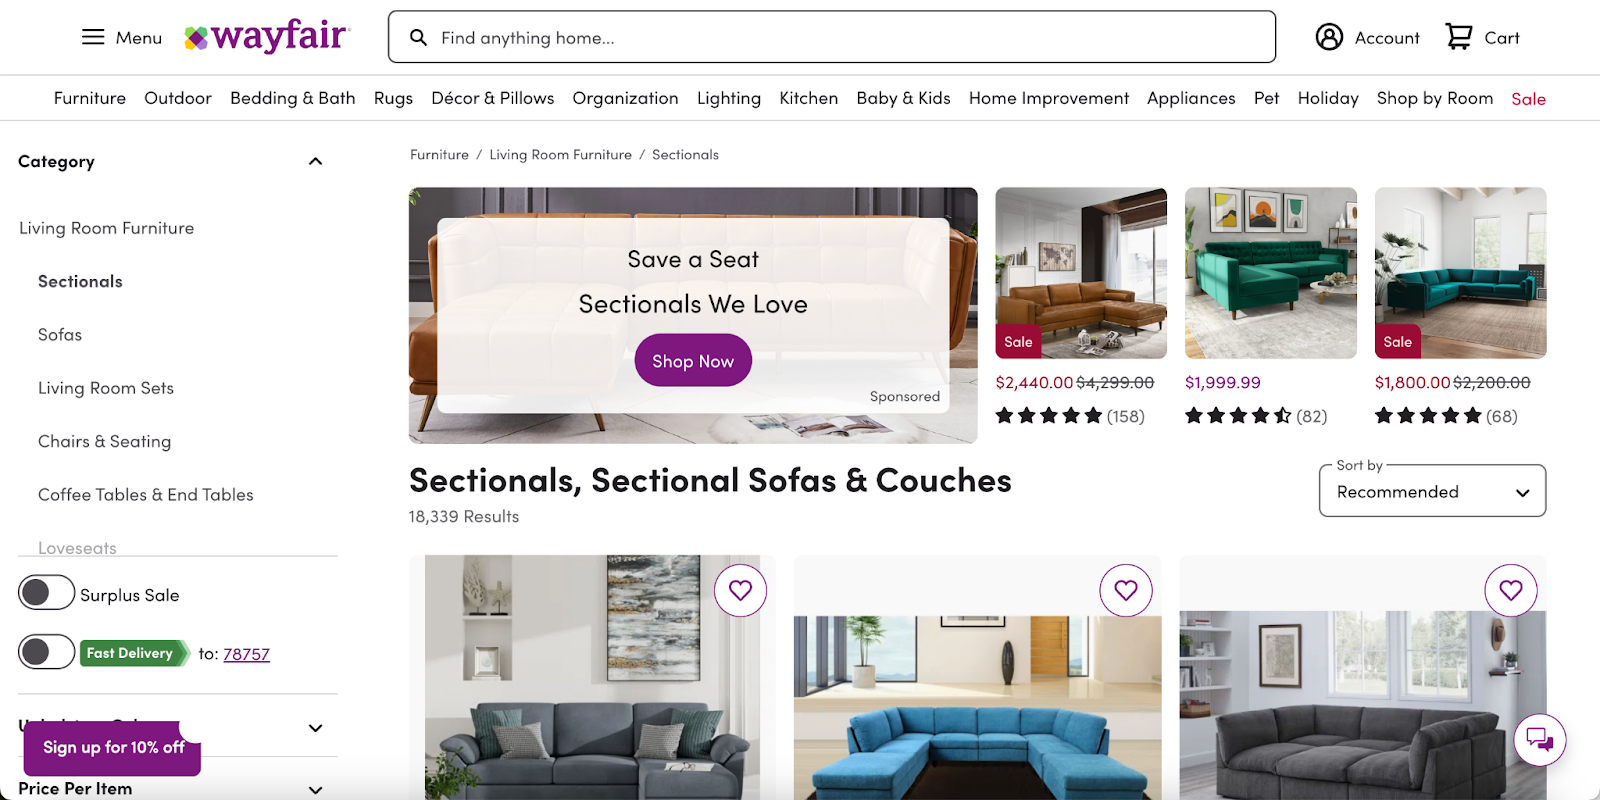 technical SEO for ecommerce: Wayfair’s homepage features user-friendly navigation.